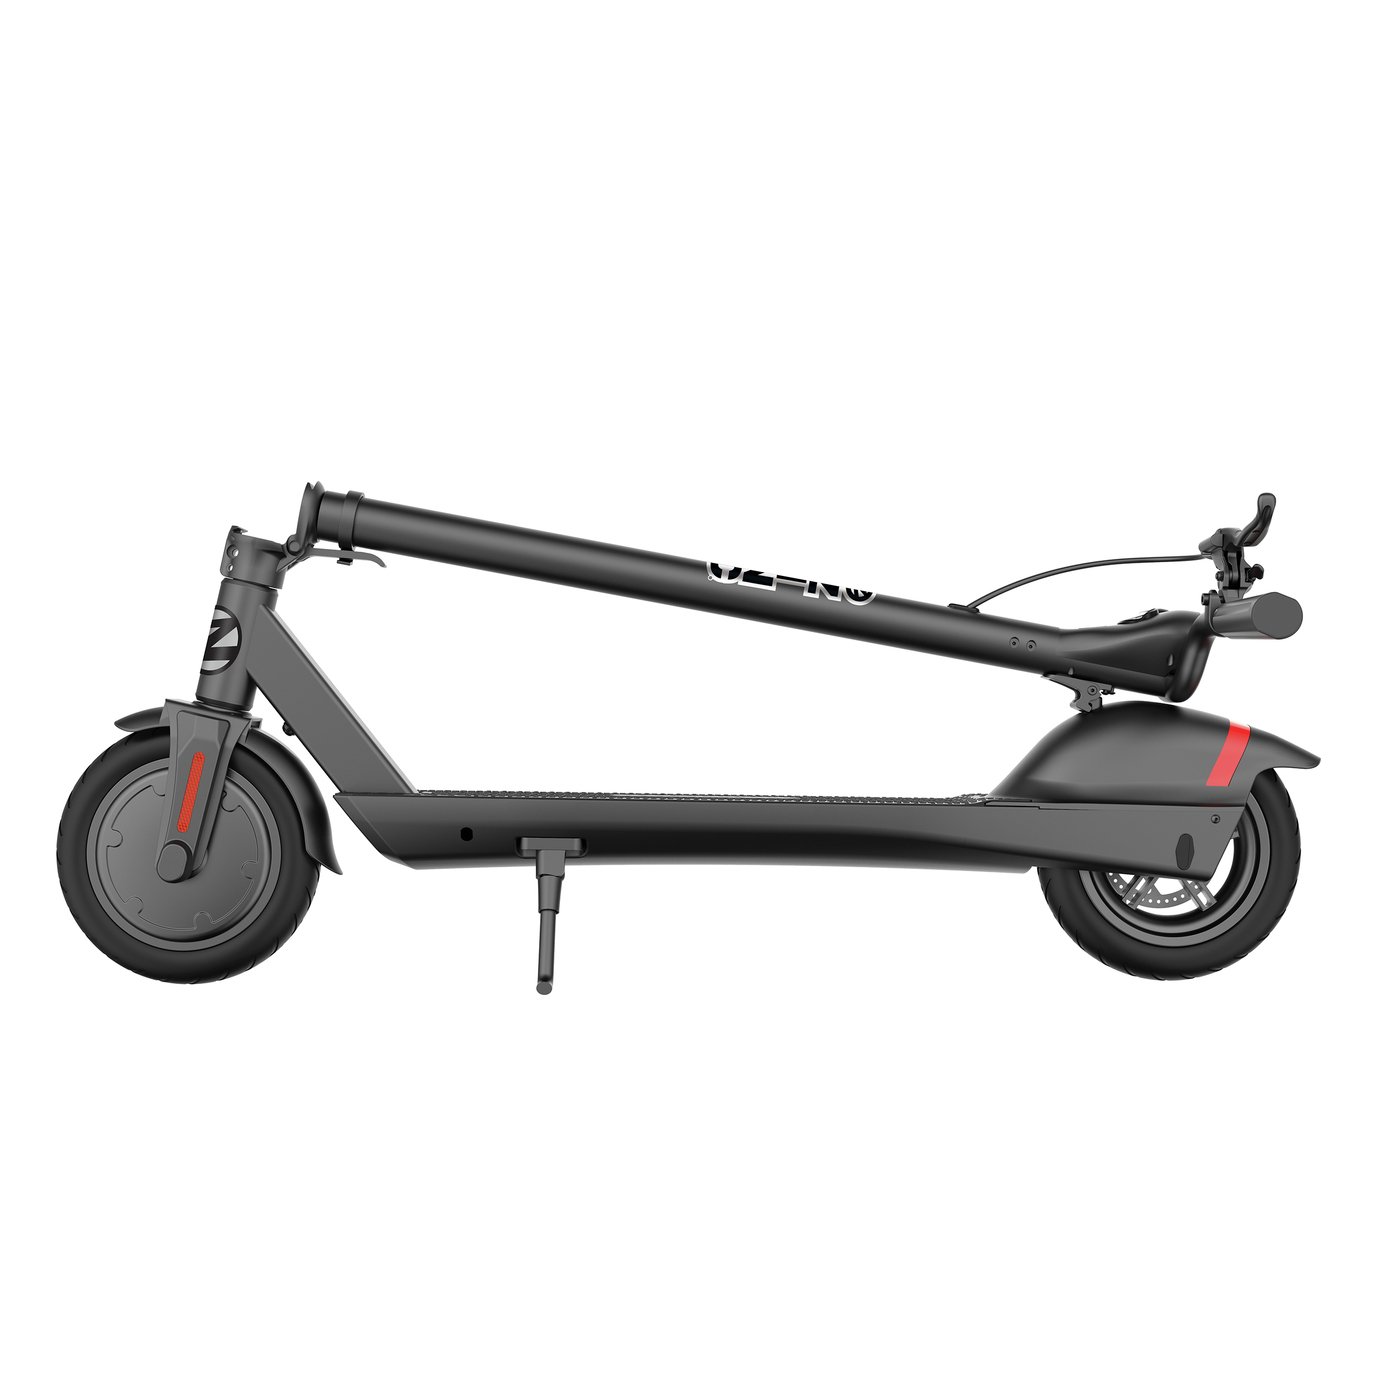 Zinc Eco Max Electric Scooter Review